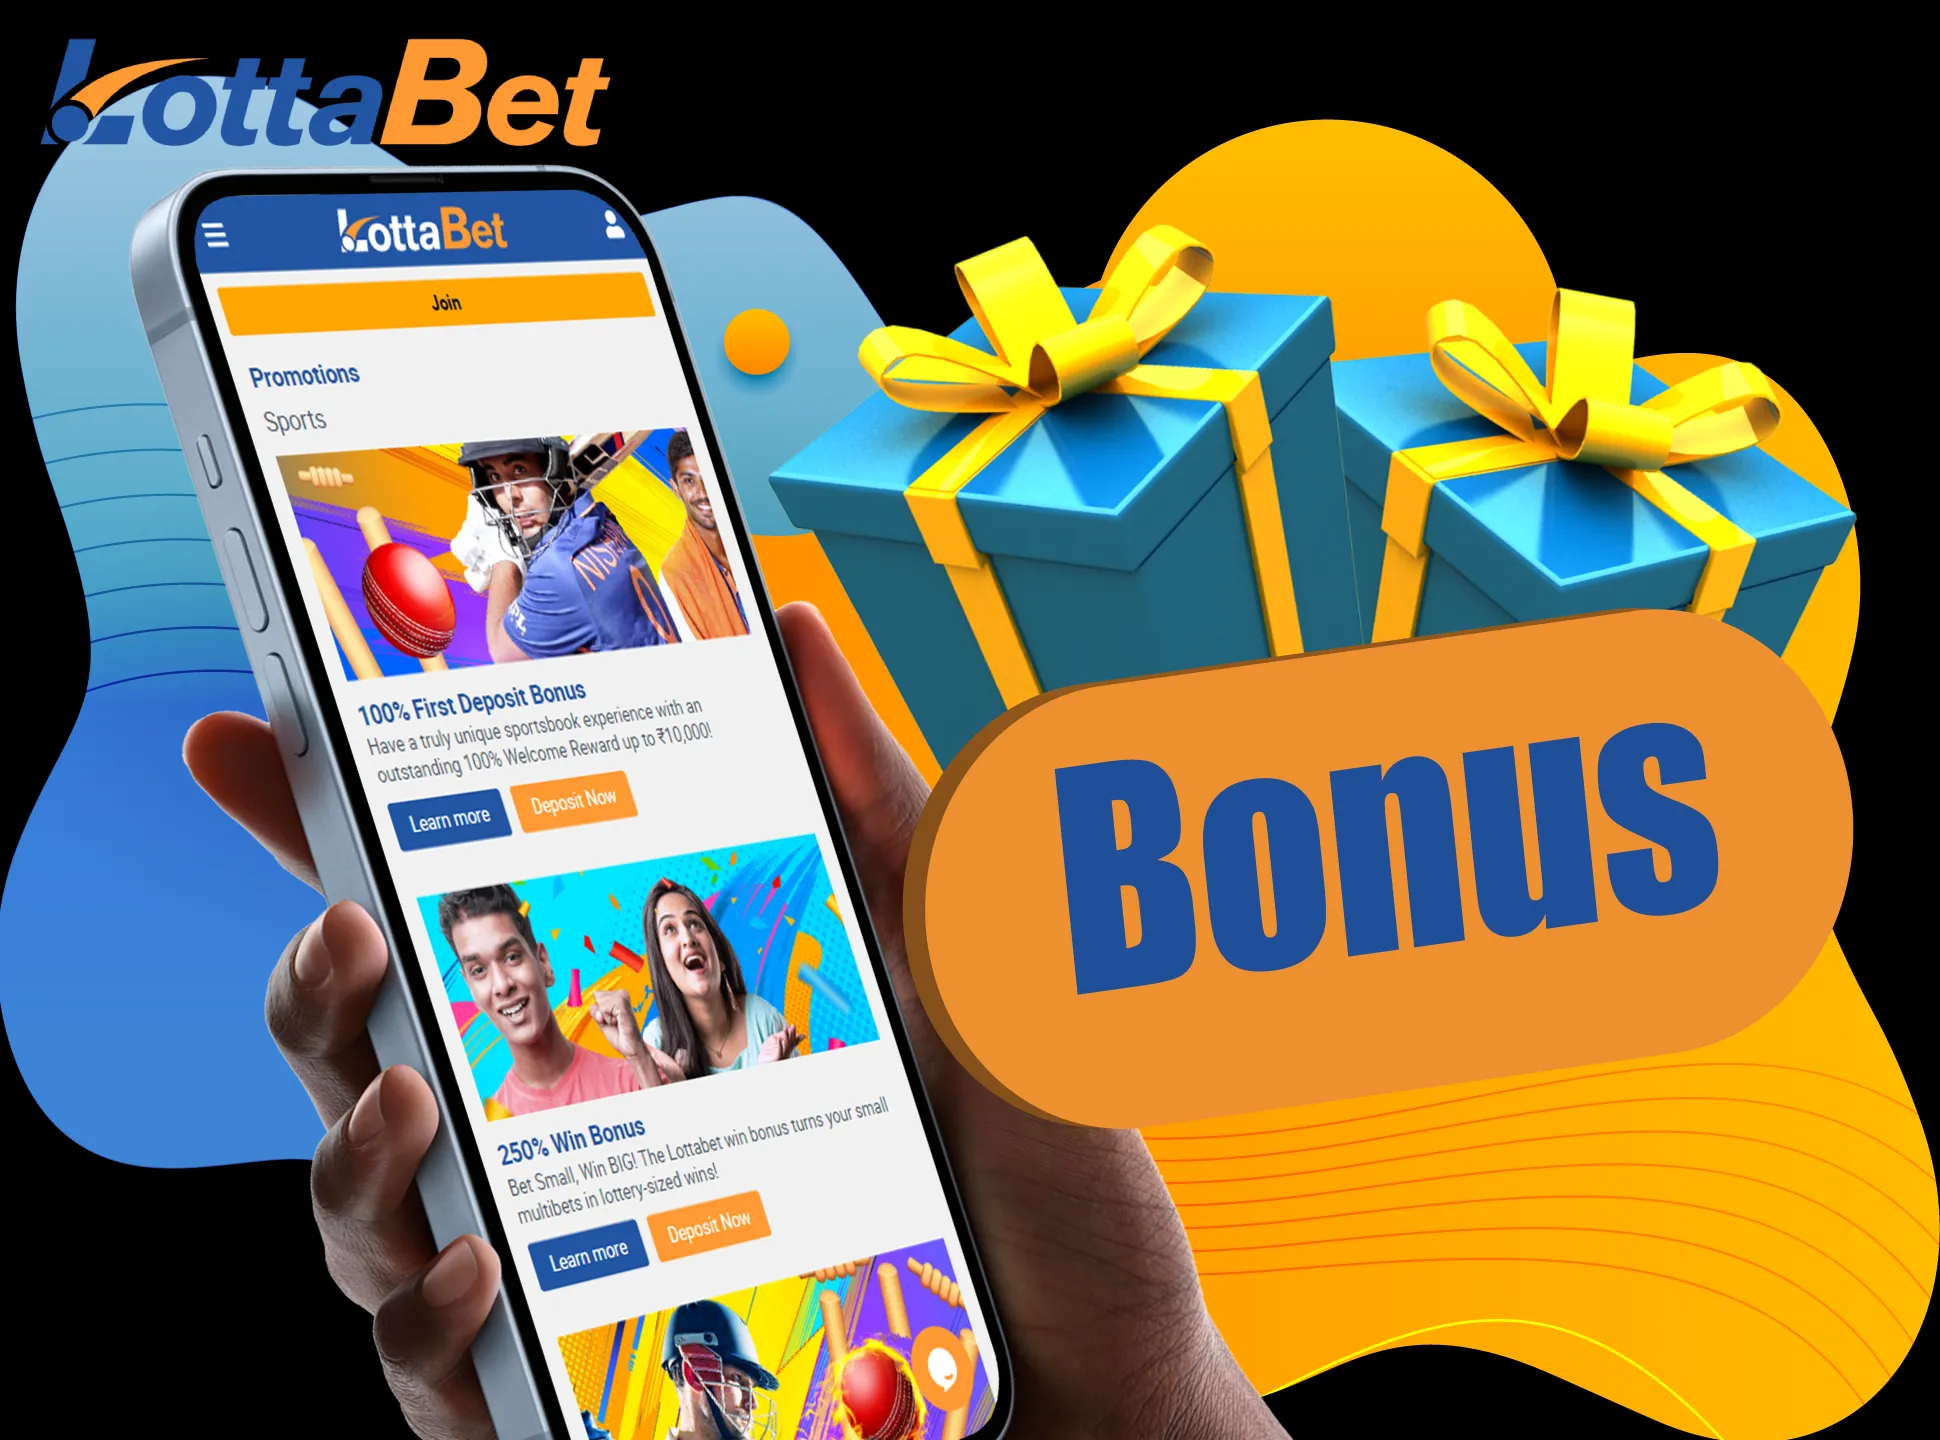 After registration you can receive a bonus on sports betting or casino games.